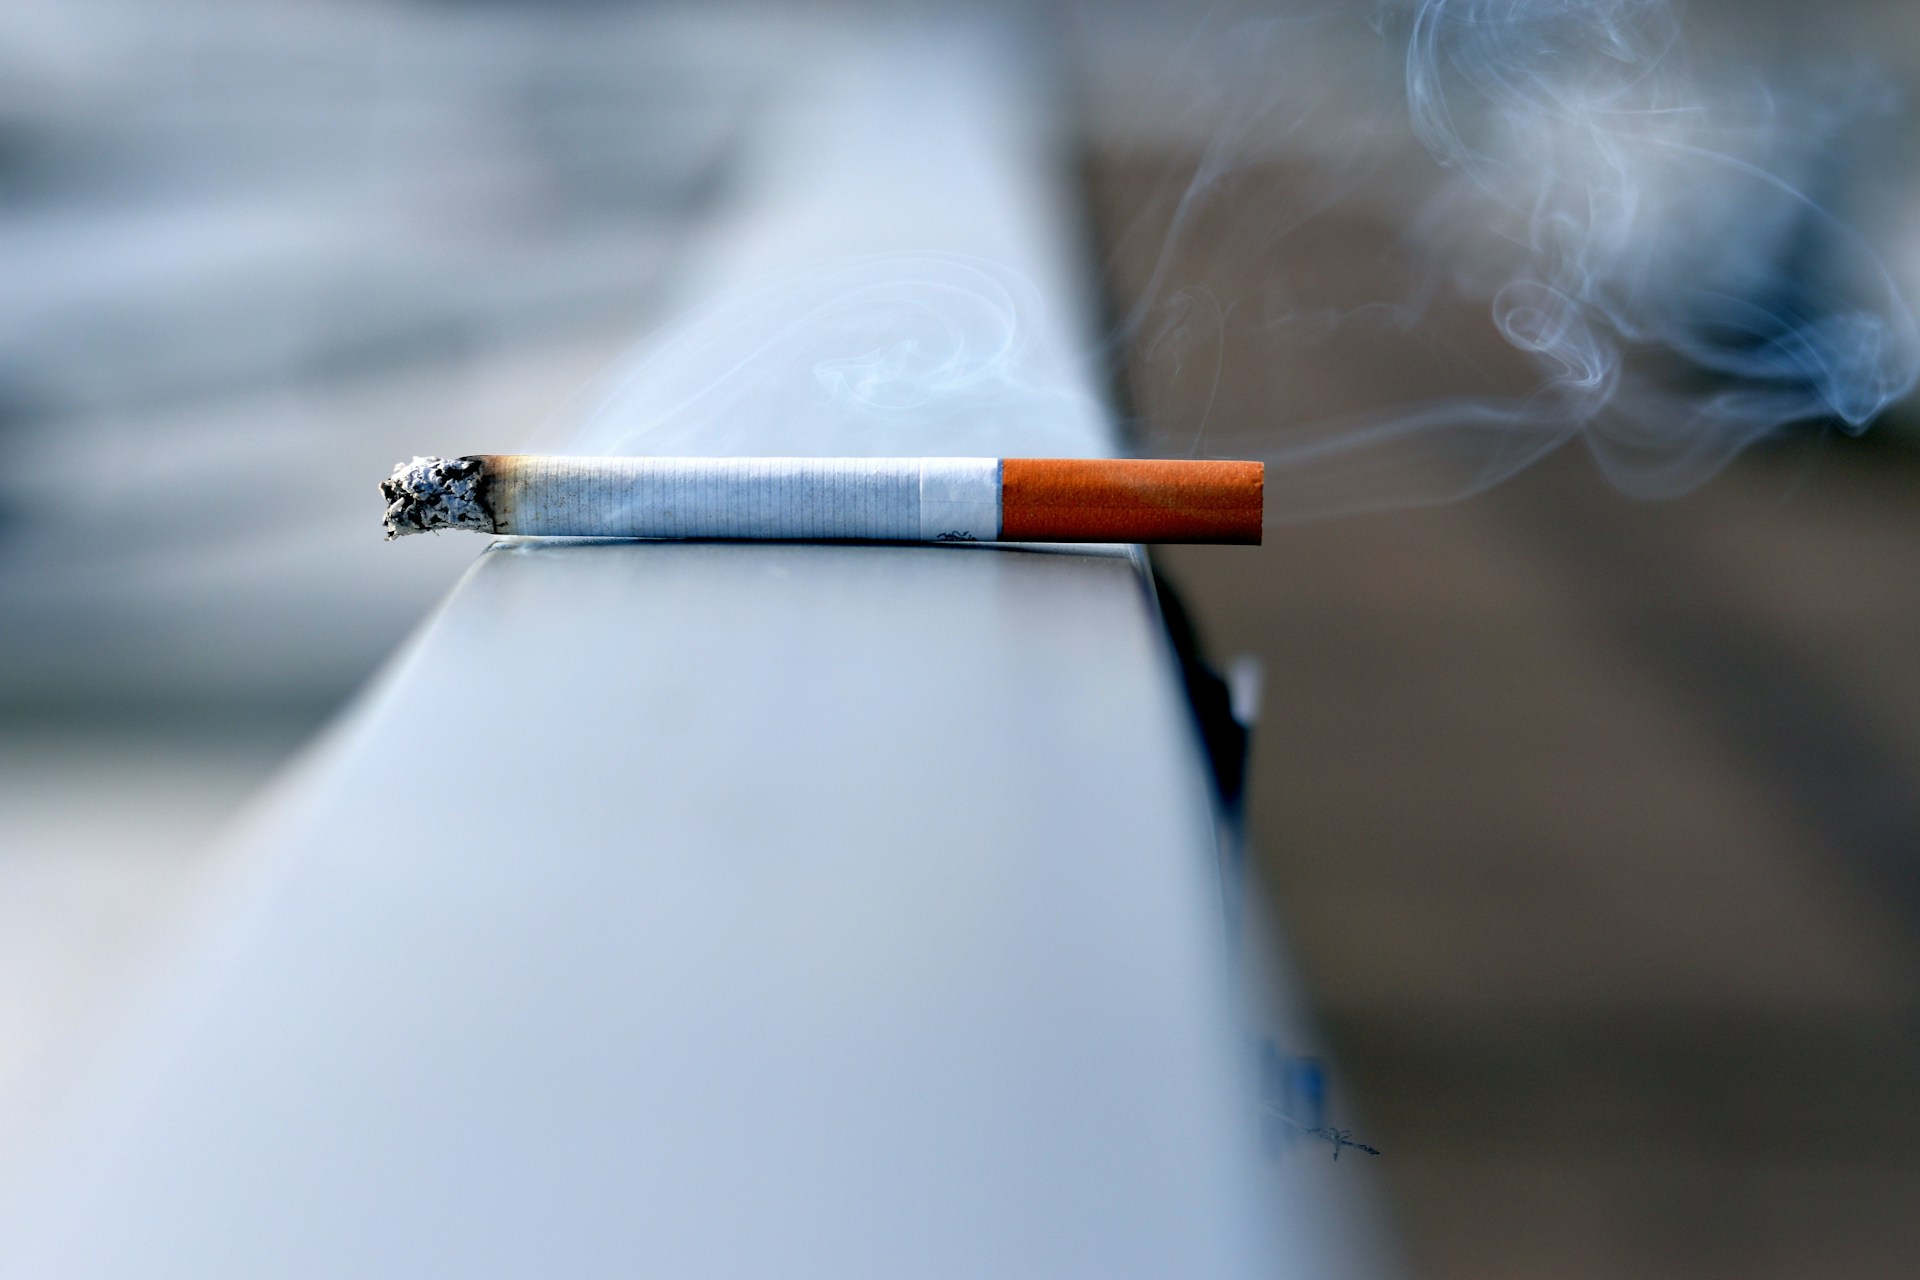 British American Tobacco Writes Down Cigarette Brands, Preps to Account for End of Traditional Combustibles Era